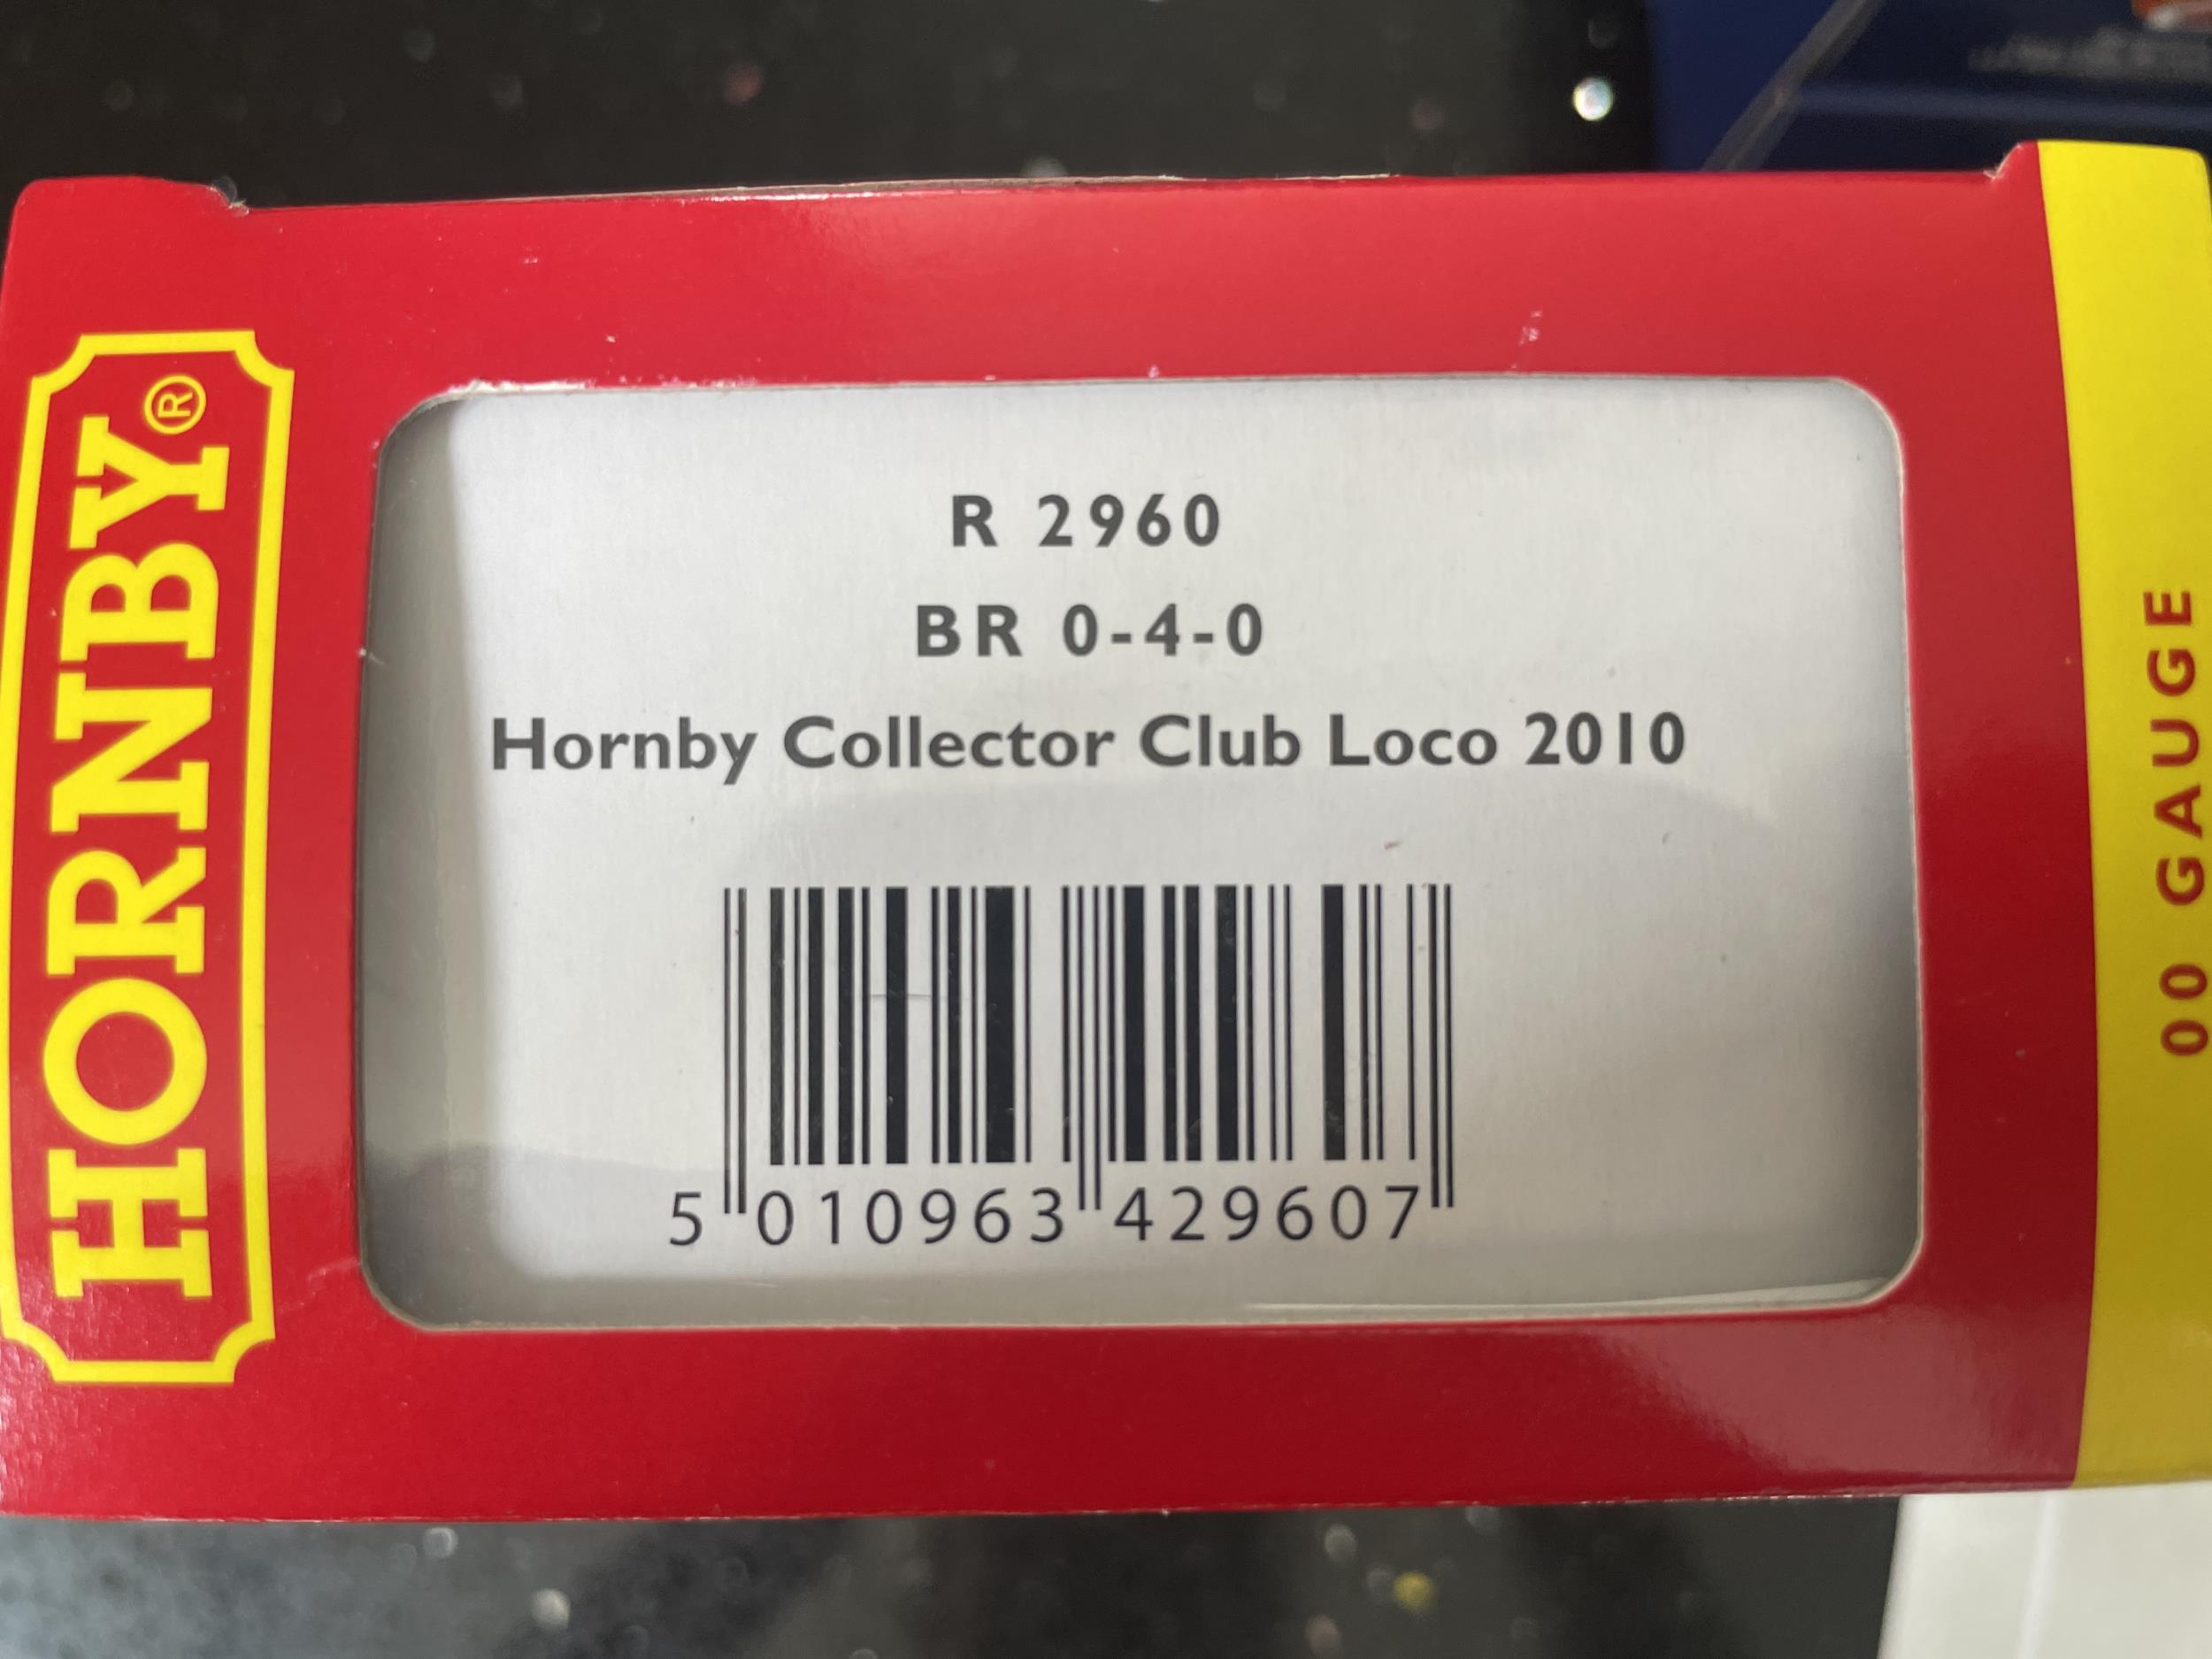 A BOXED HORNBY 00 GAUGE BR 0-4-0 HORNBY COLLECTOR CLUB LOCO 2010 - Image 3 of 3